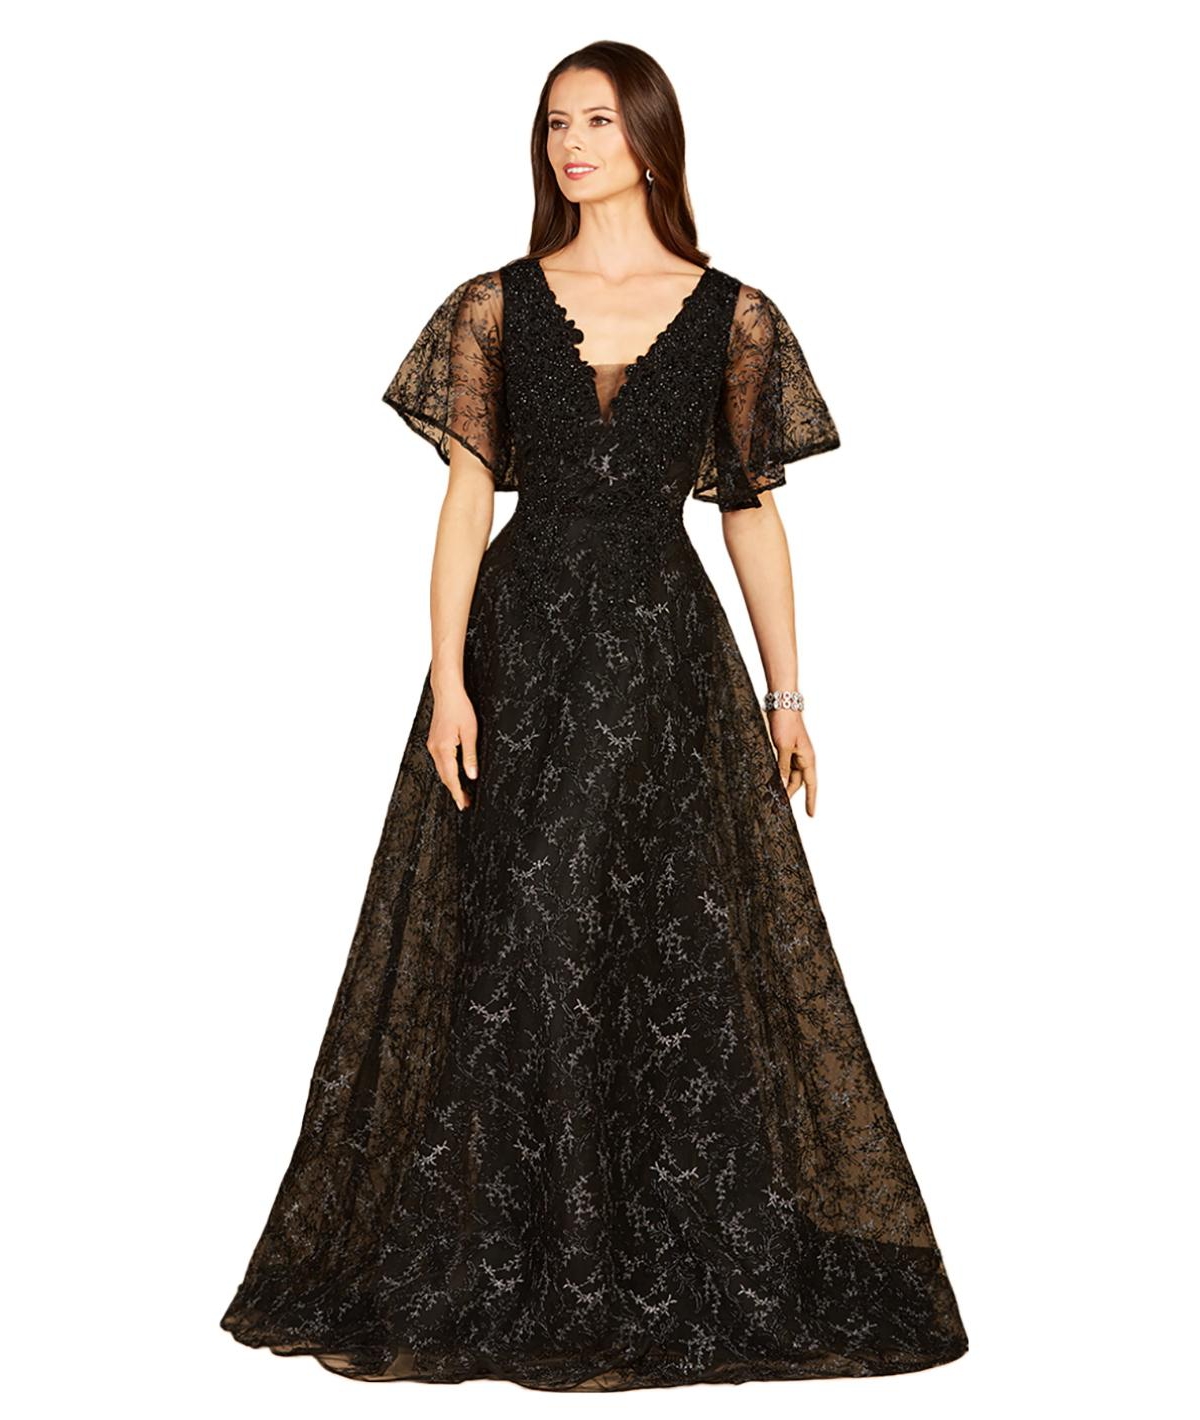 Victorian Dresses | Victorian Ballgowns | Victorian Clothing Womens Cape Sleeve Beaded Gown in Black $598.00 AT vintagedancer.com